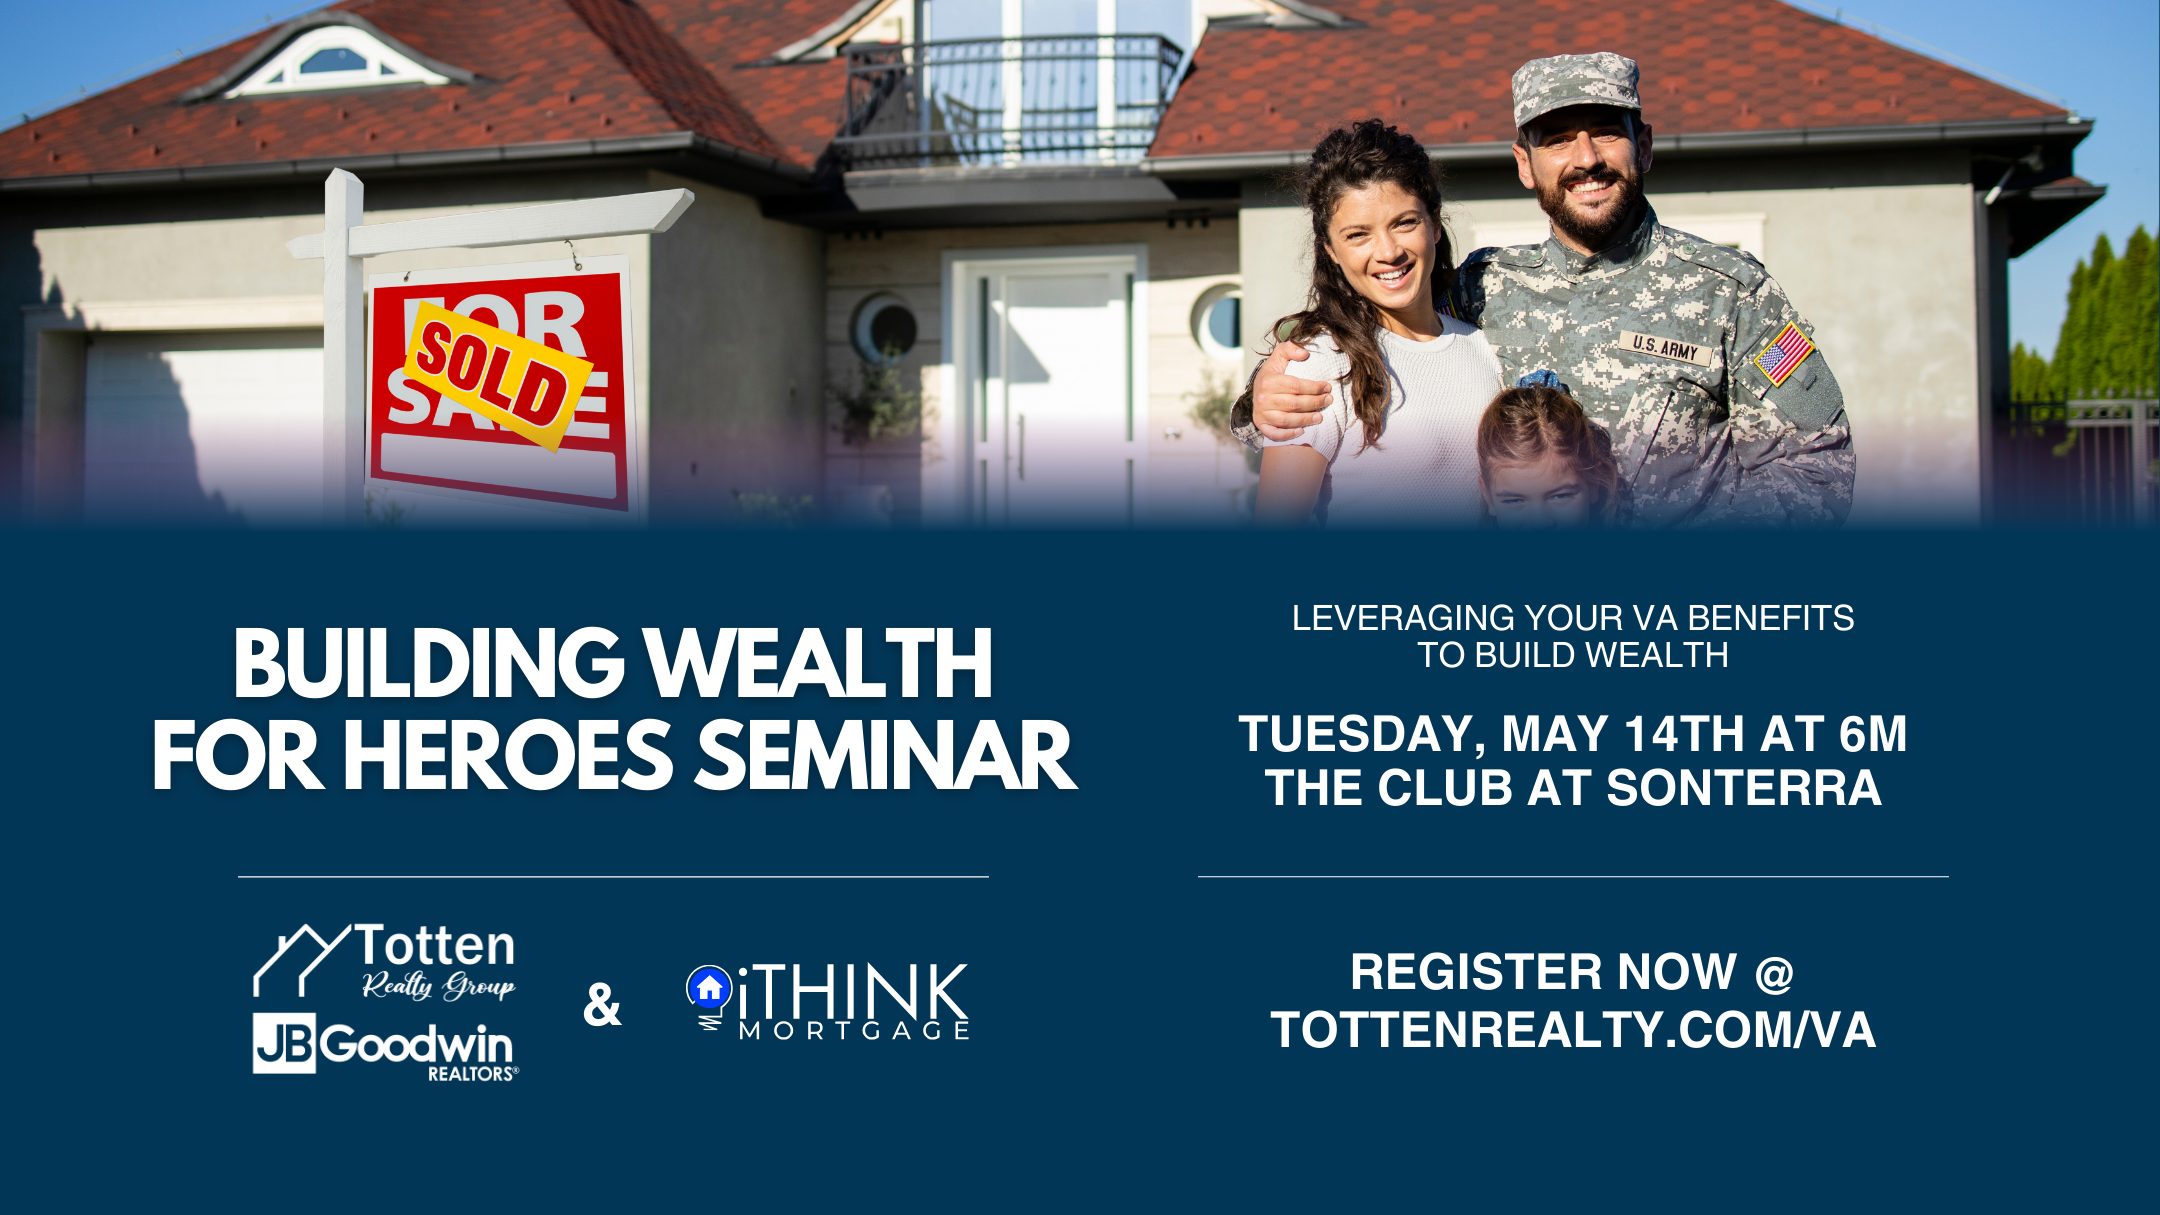 Building Wealth For Heroes Seminar (1920 x 1080 px) (2)